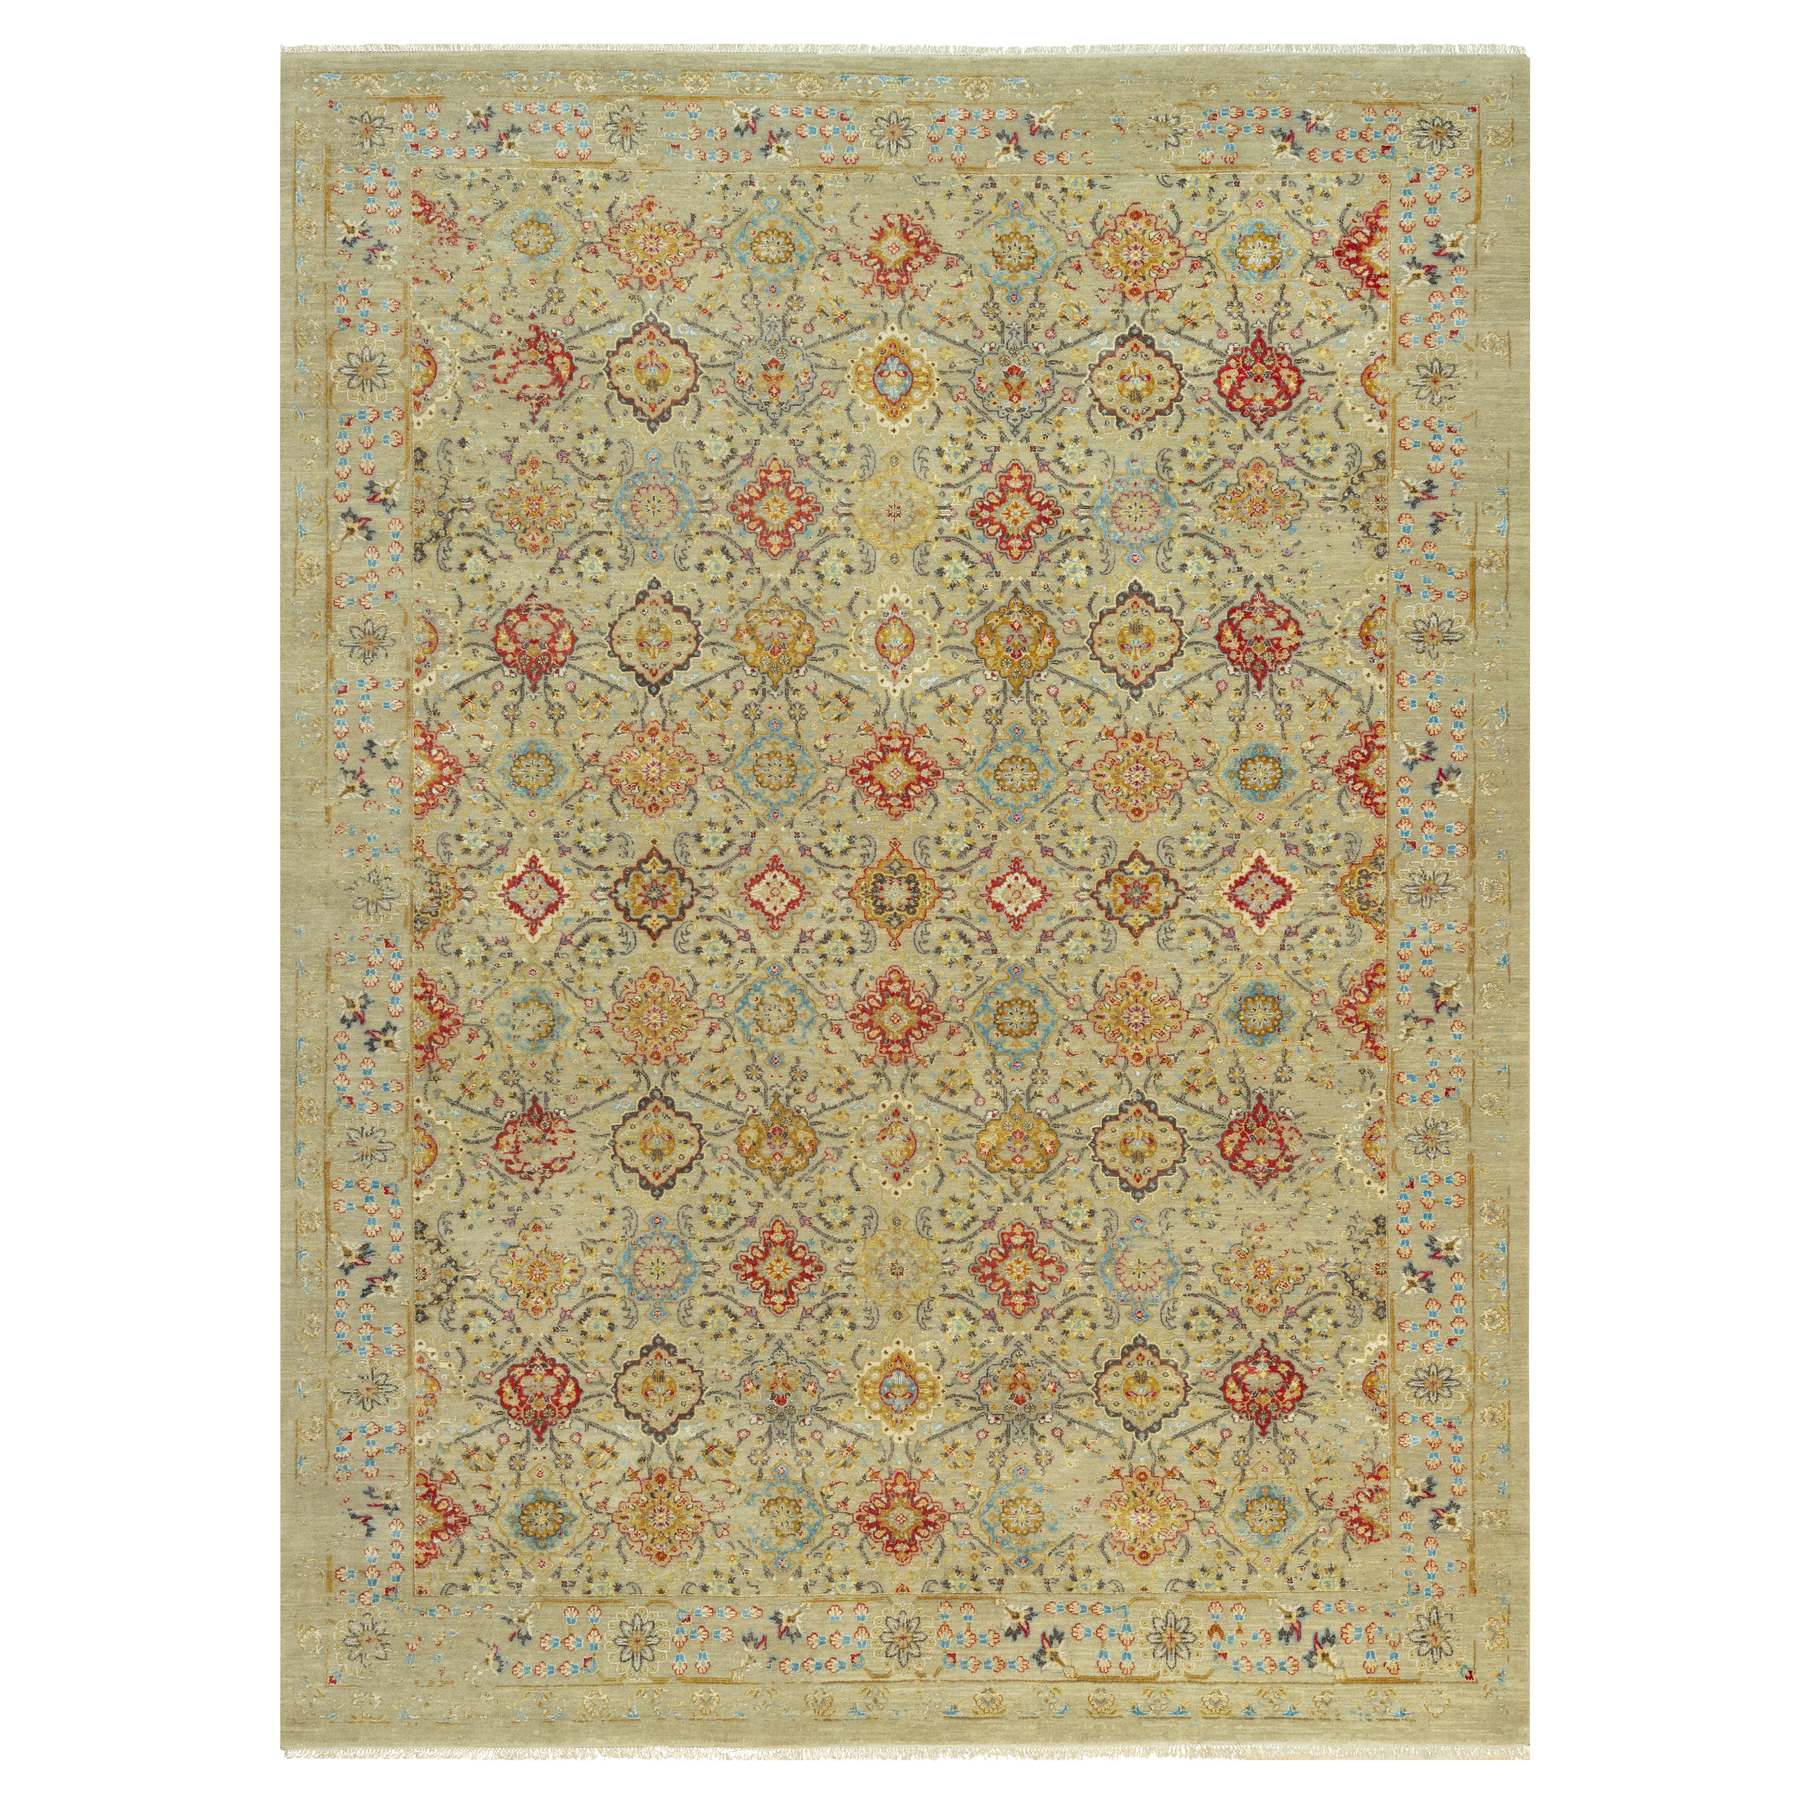  Silk Hand-Knotted Area Rug 10'3